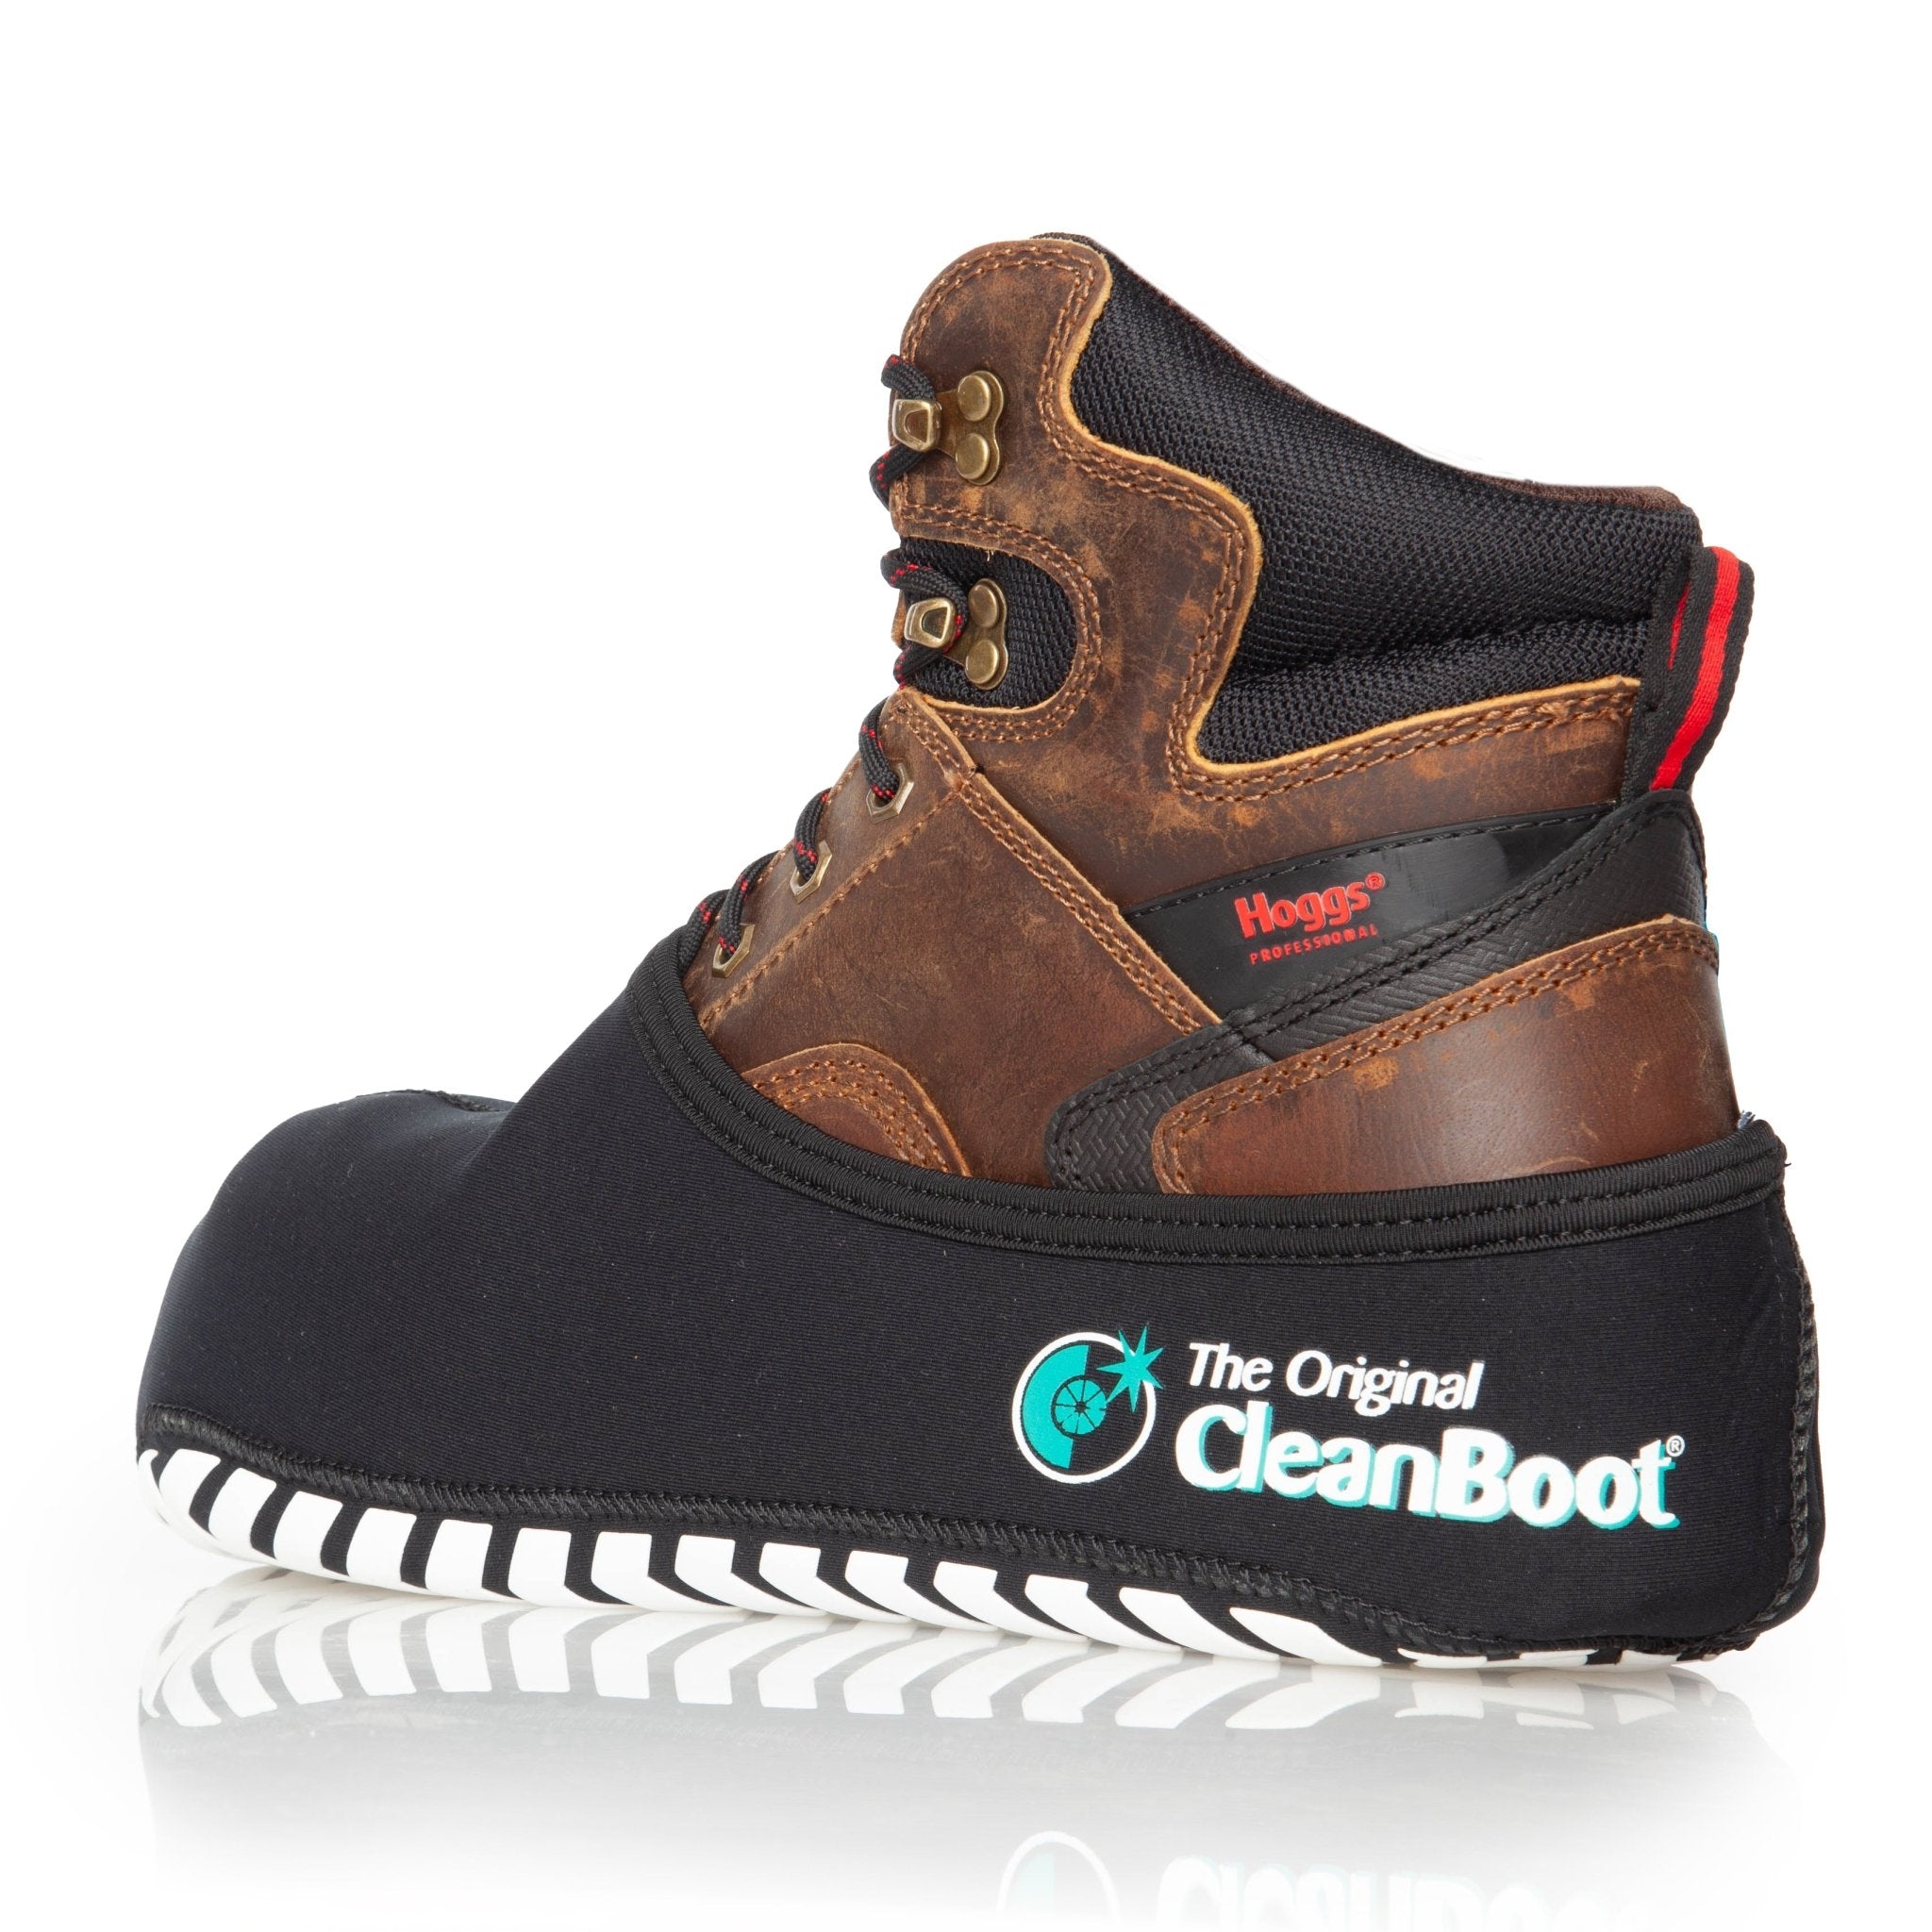 4elementsclothingThe Original CleanBootThe Original CleanBoot ™ – Professional, Stretchable design with a grippy sole, Protect your floor.Safety Footwear5060976970177